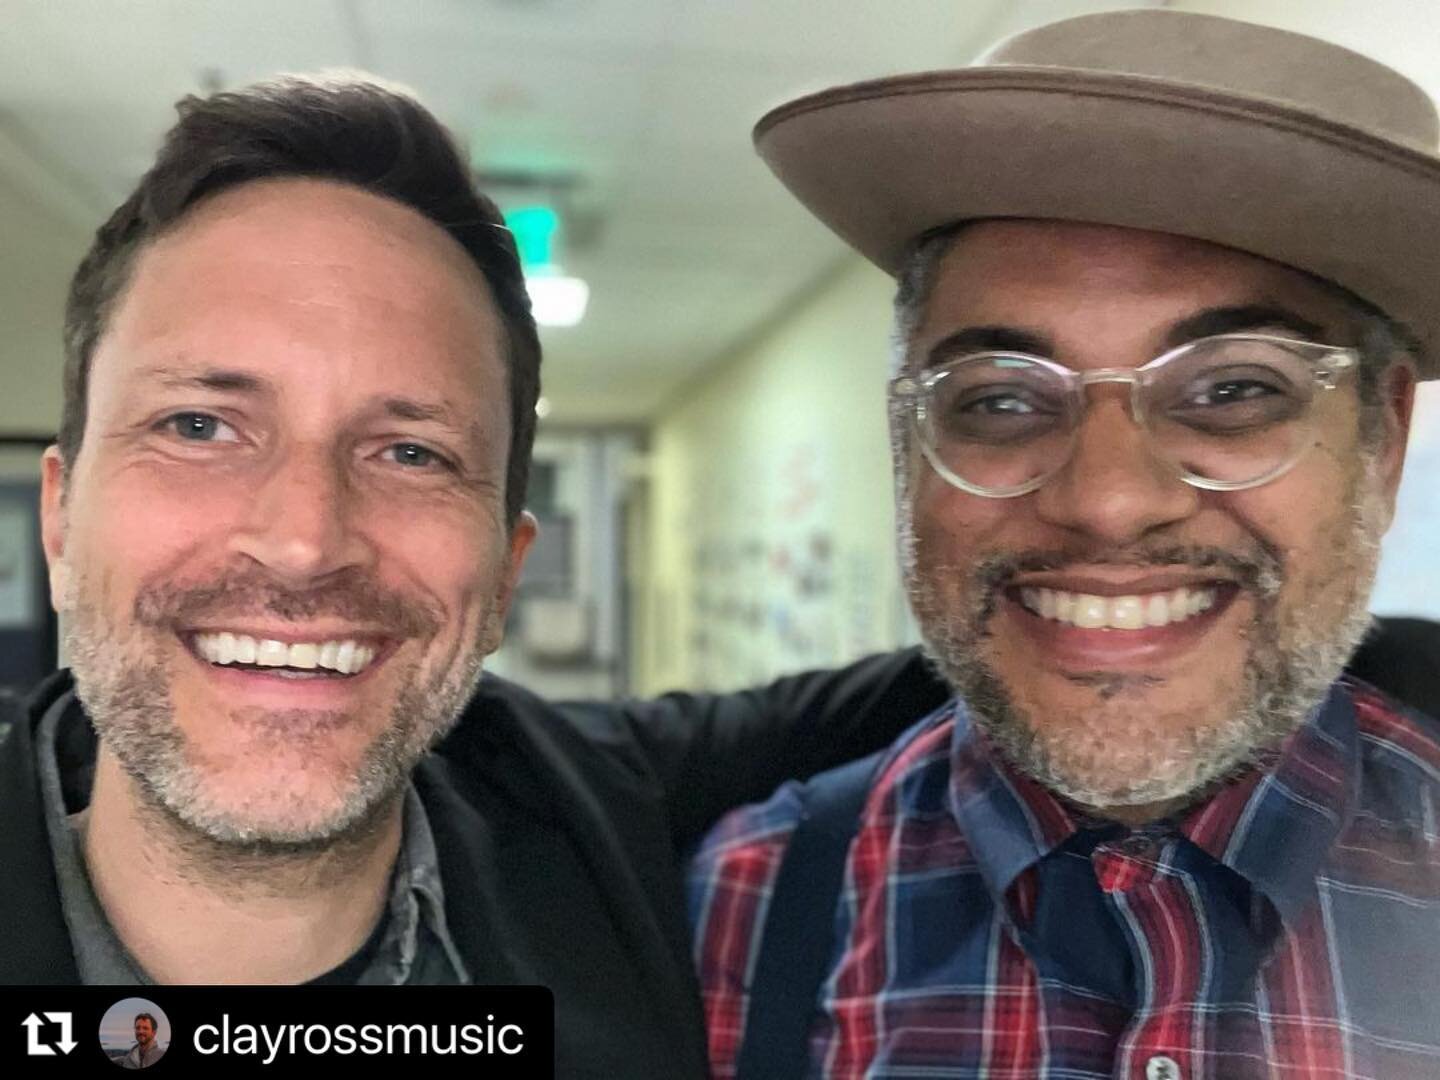 #Repost @clayrossmusic with @use.repost
・・・
🎶 Jammin' at the Mondavi Center 🎶

Had an unforgettable time making music and chatting with the incredibly talented Dom Flemons at the beautiful Mondavi Center, UC Davis! 🎤🎸 Our shared passion for roots